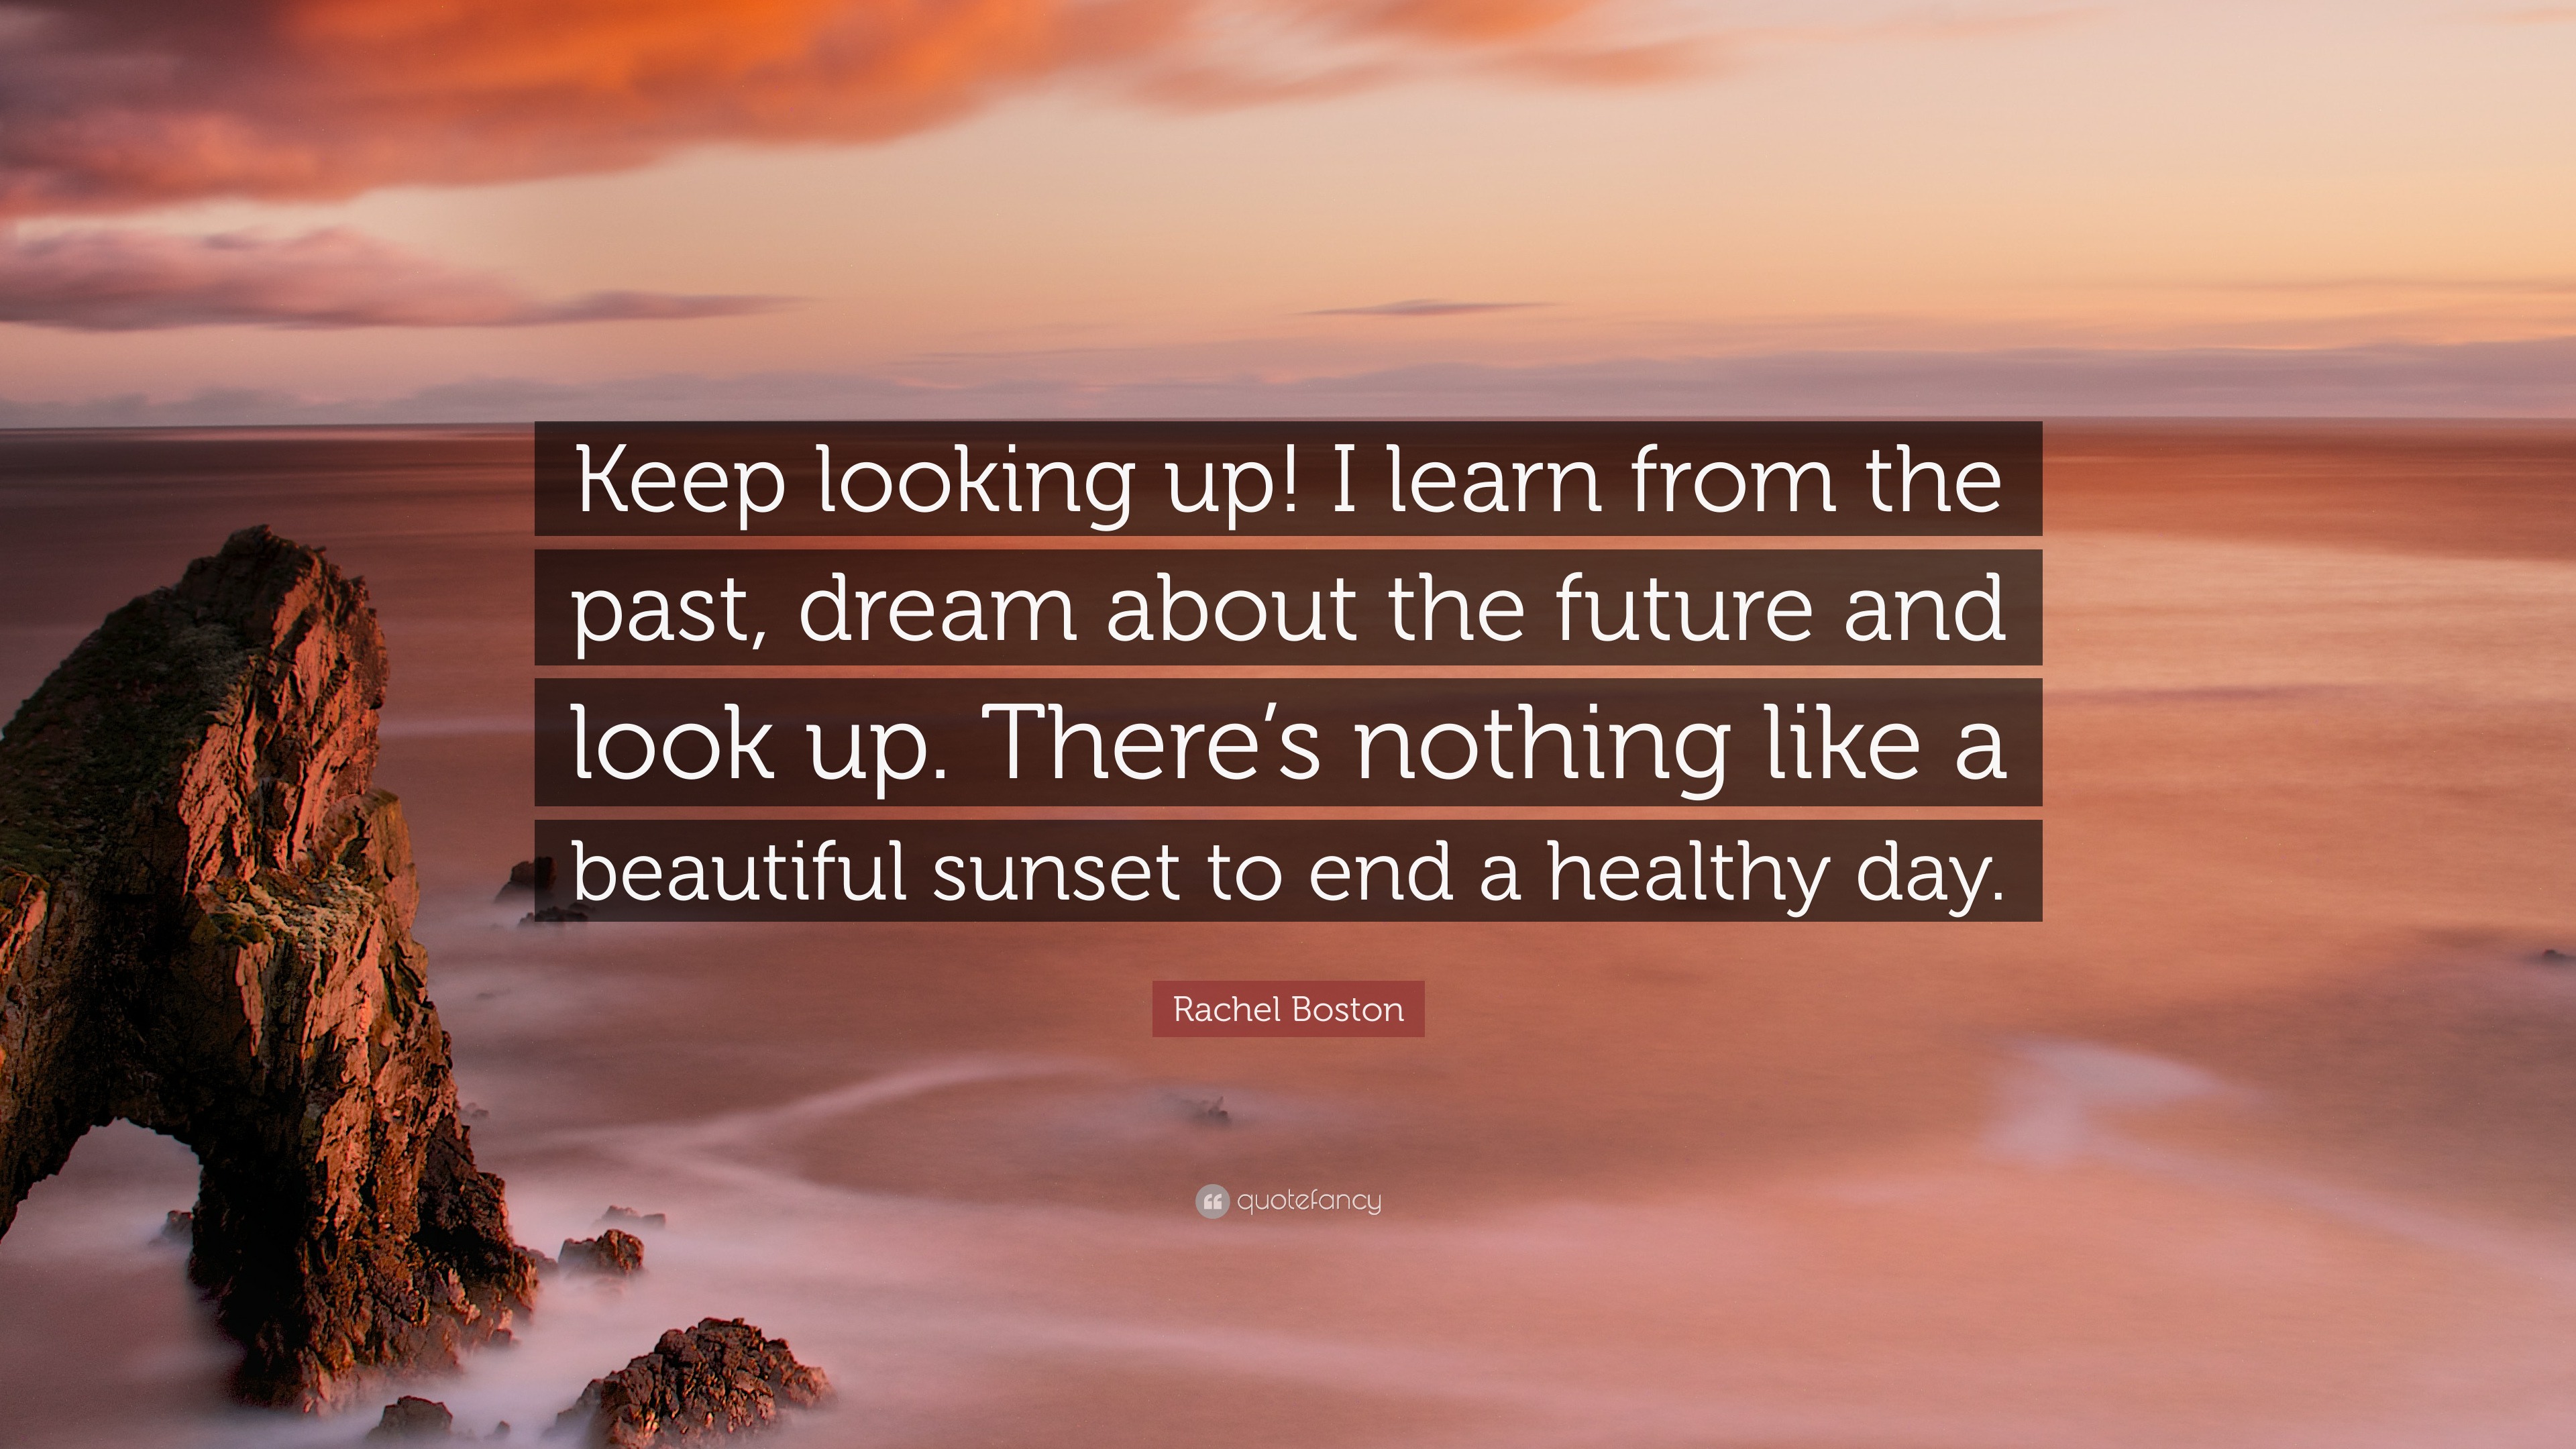 Rachel Boston Quote Keep Looking Up I Learn From The Past Dream About The Future And Look Up There S Nothing Like A Beautiful Sunset To E